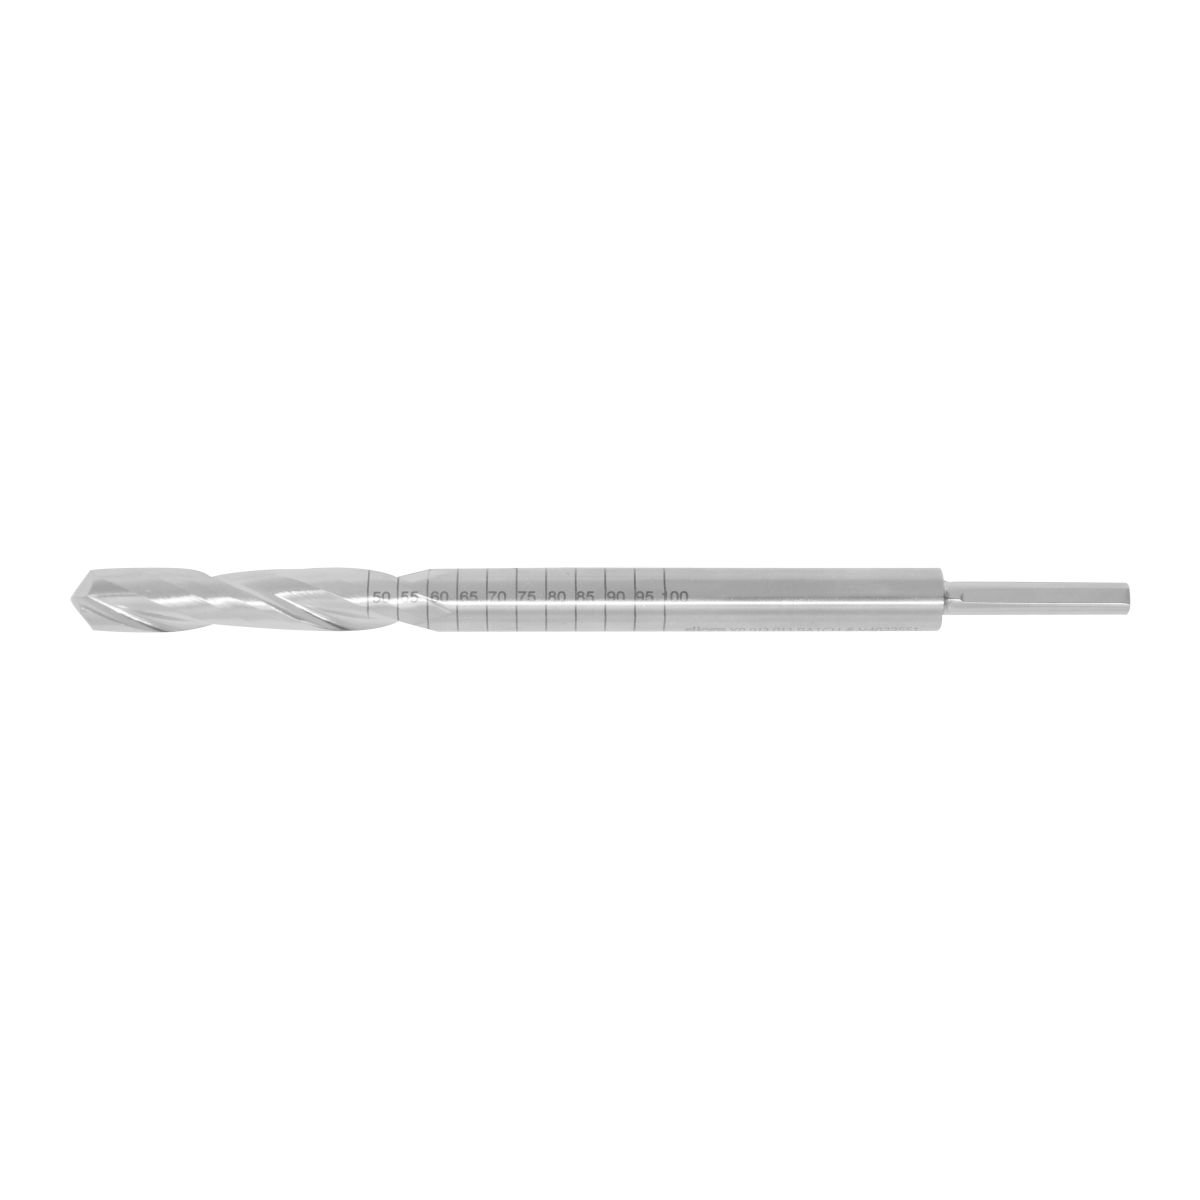 Cannulated Tibia Reamer 11mm